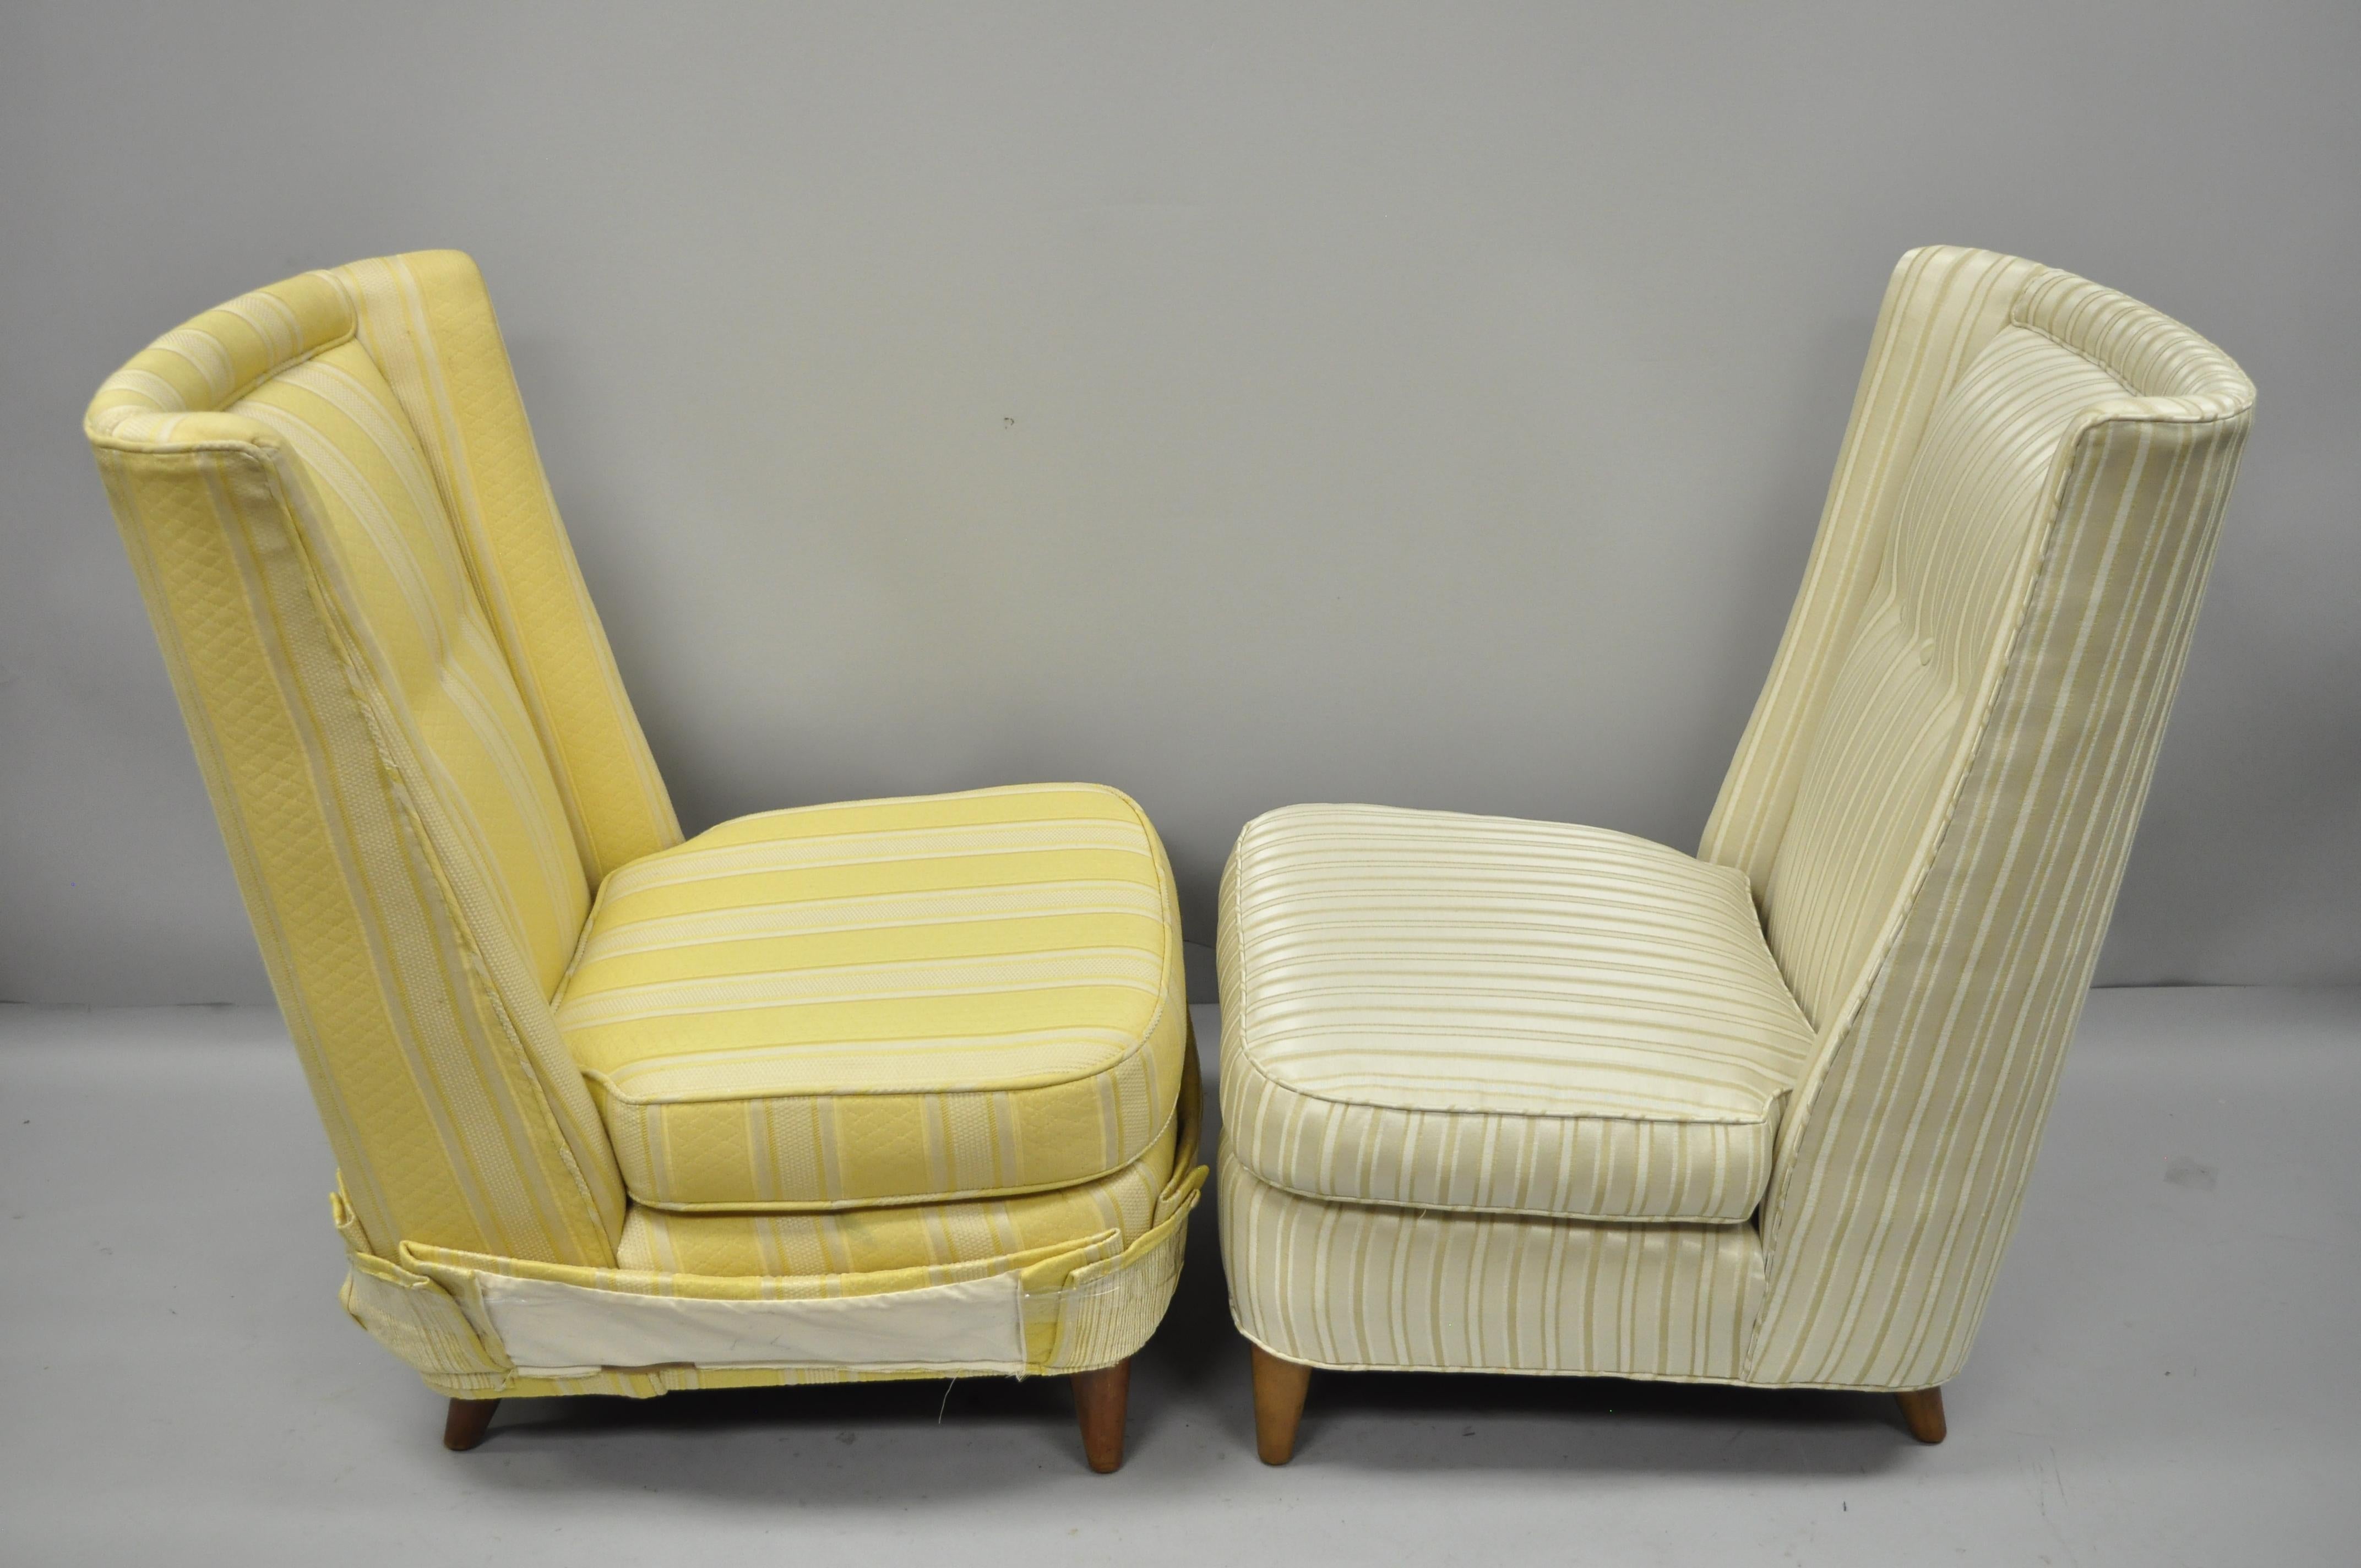 American Paul Laszlo Upholstered Slipper Lounge Chair Barrel Back a Pair For Sale